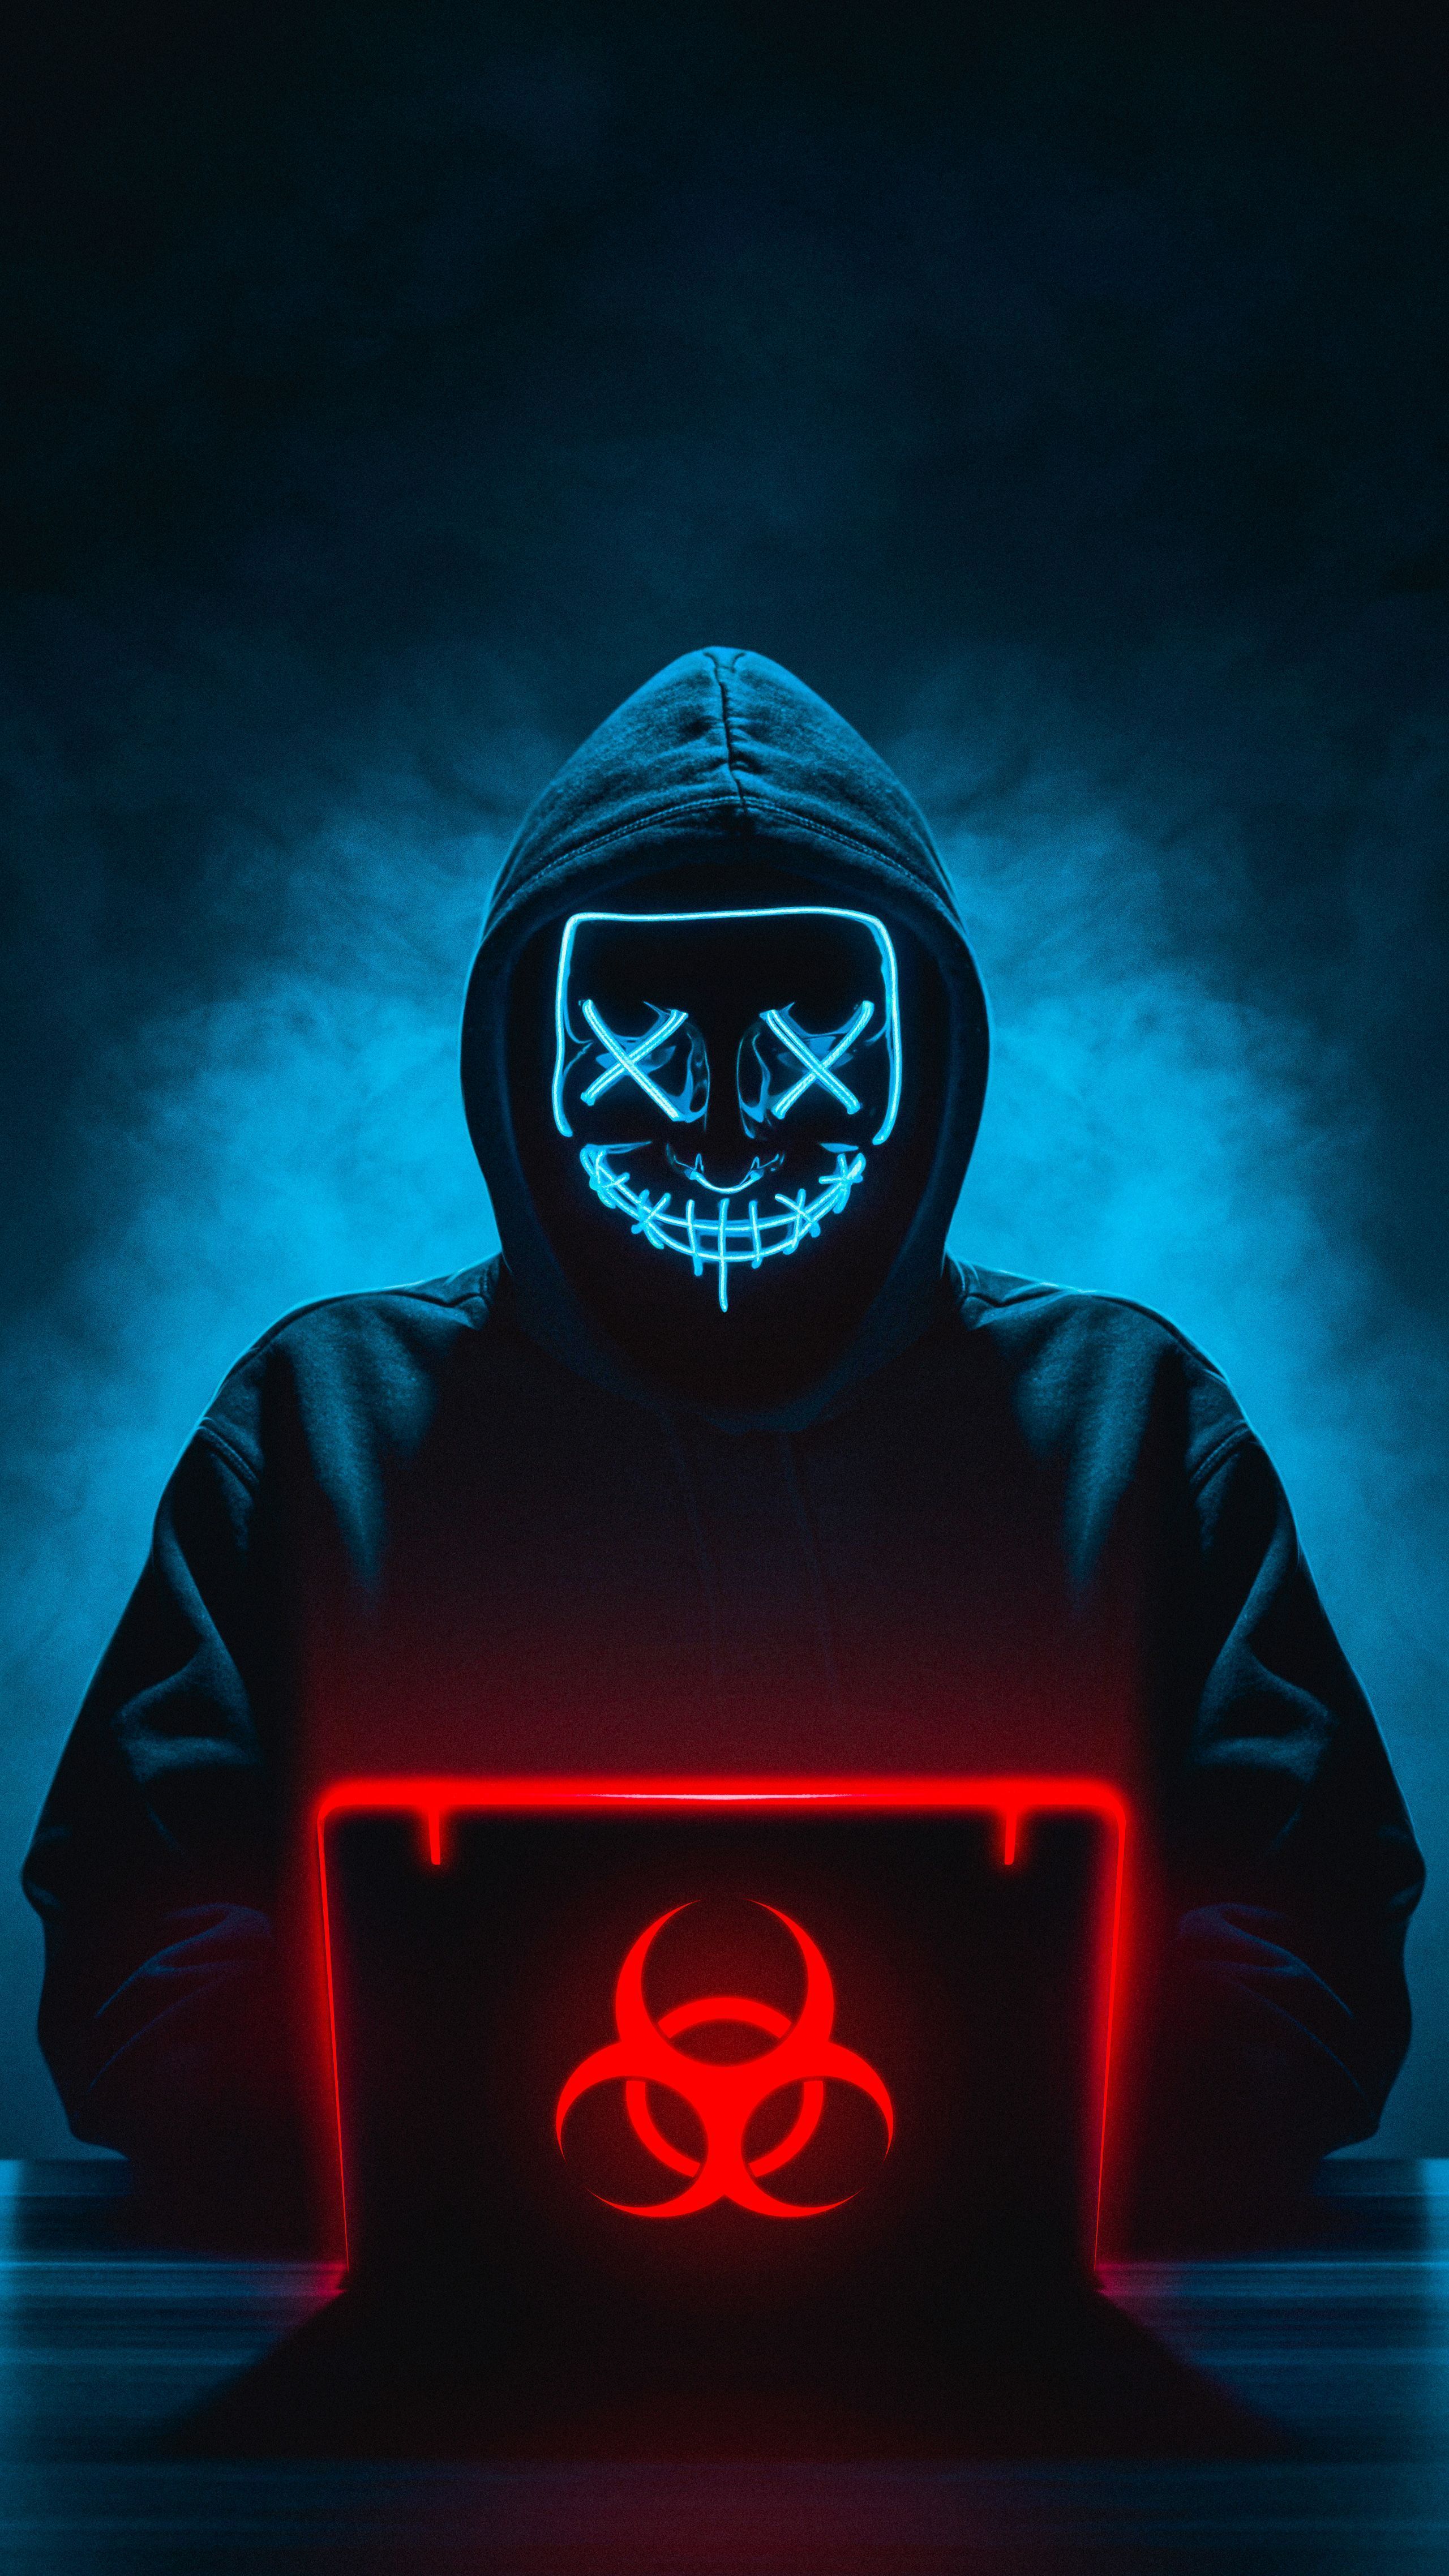 Hacking Android Wallpaper Free Hacking Android Background